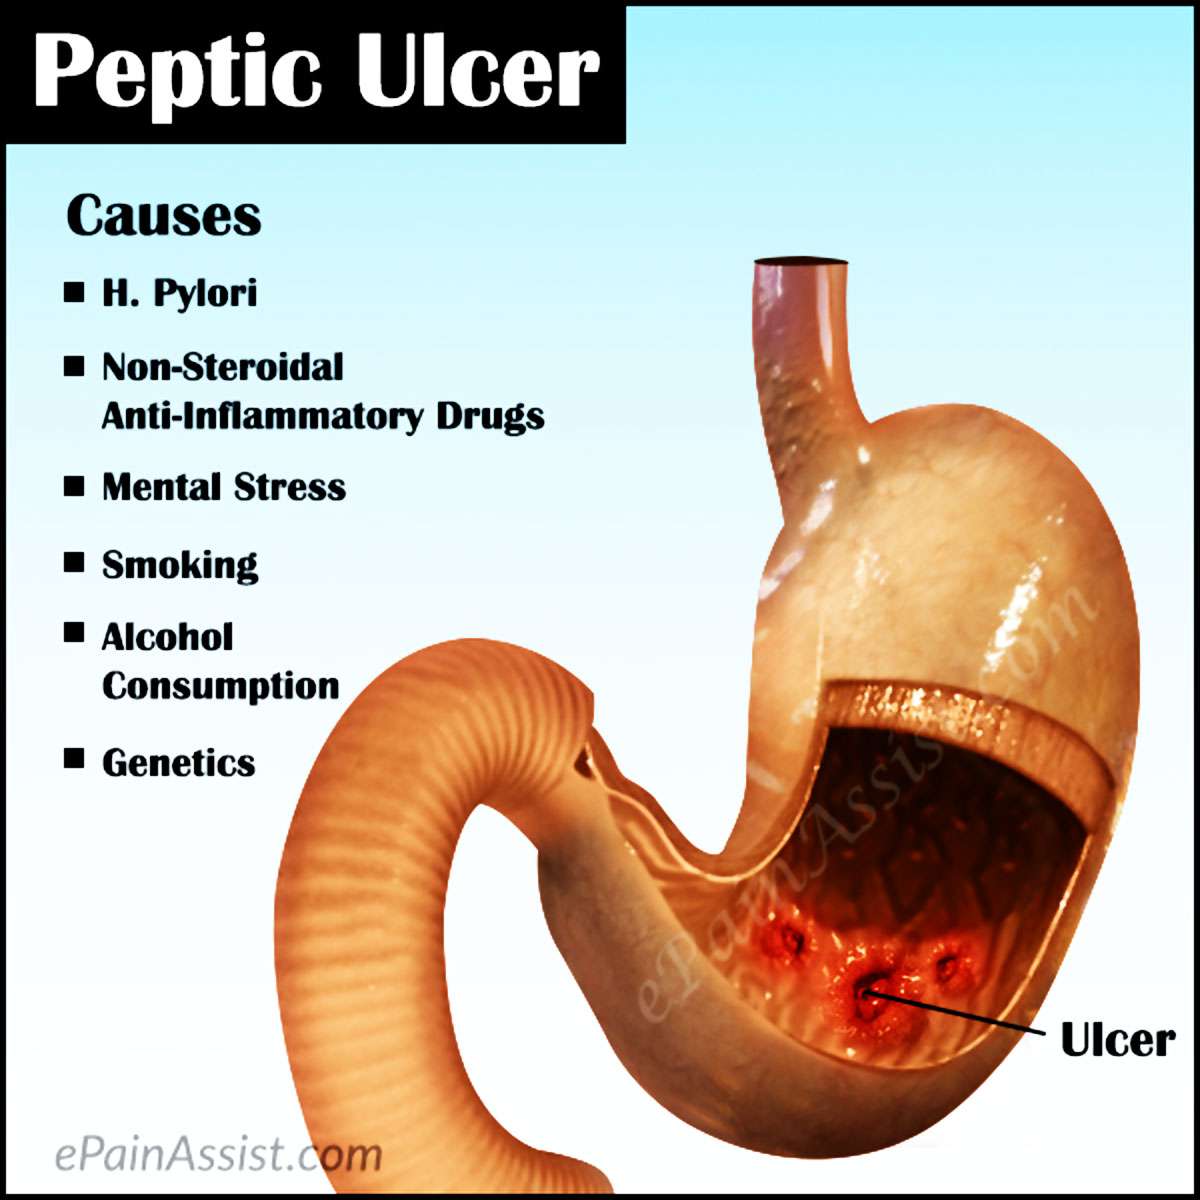 Peptic Ulcer: Treatment, Causes, Symptoms, Types, Tests